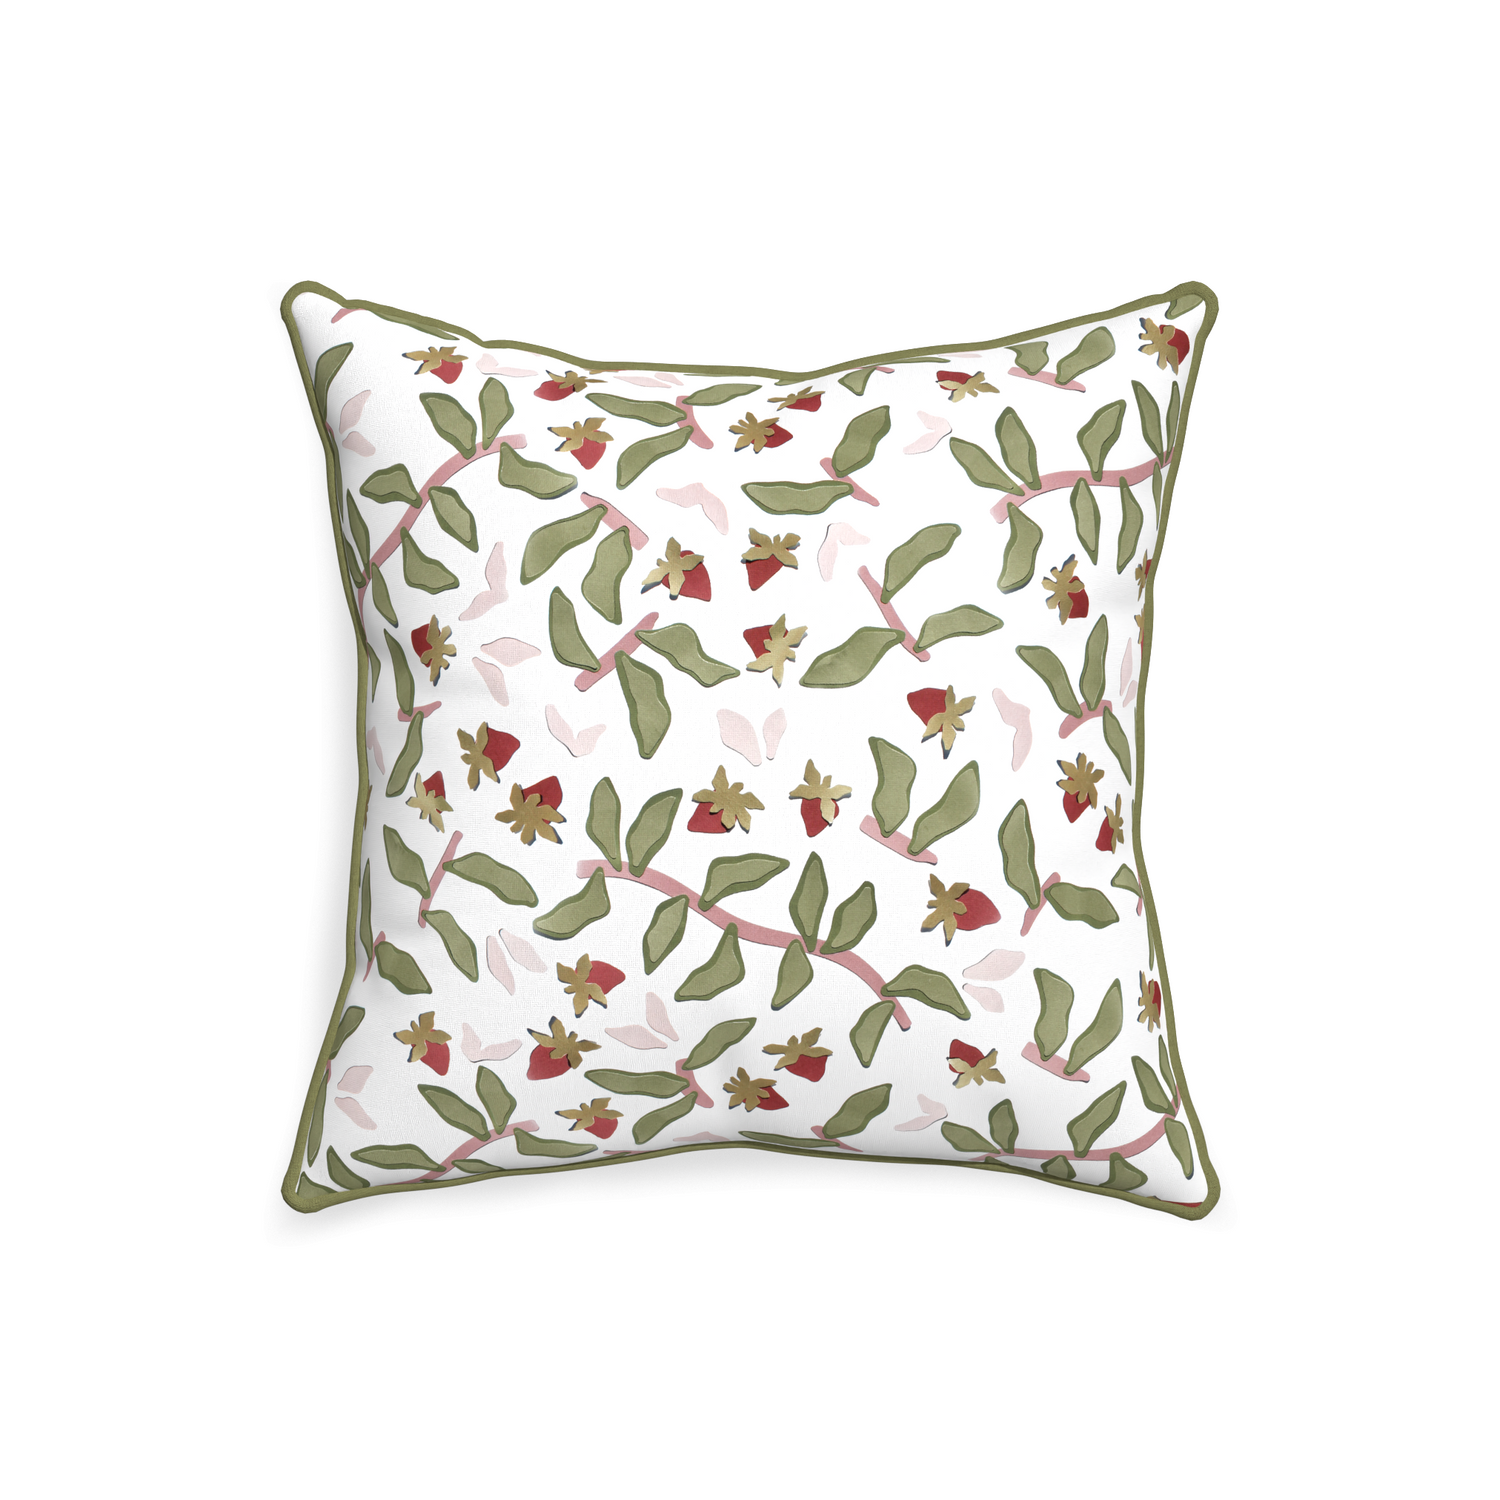 20-square nellie custom pillow with moss piping on white background